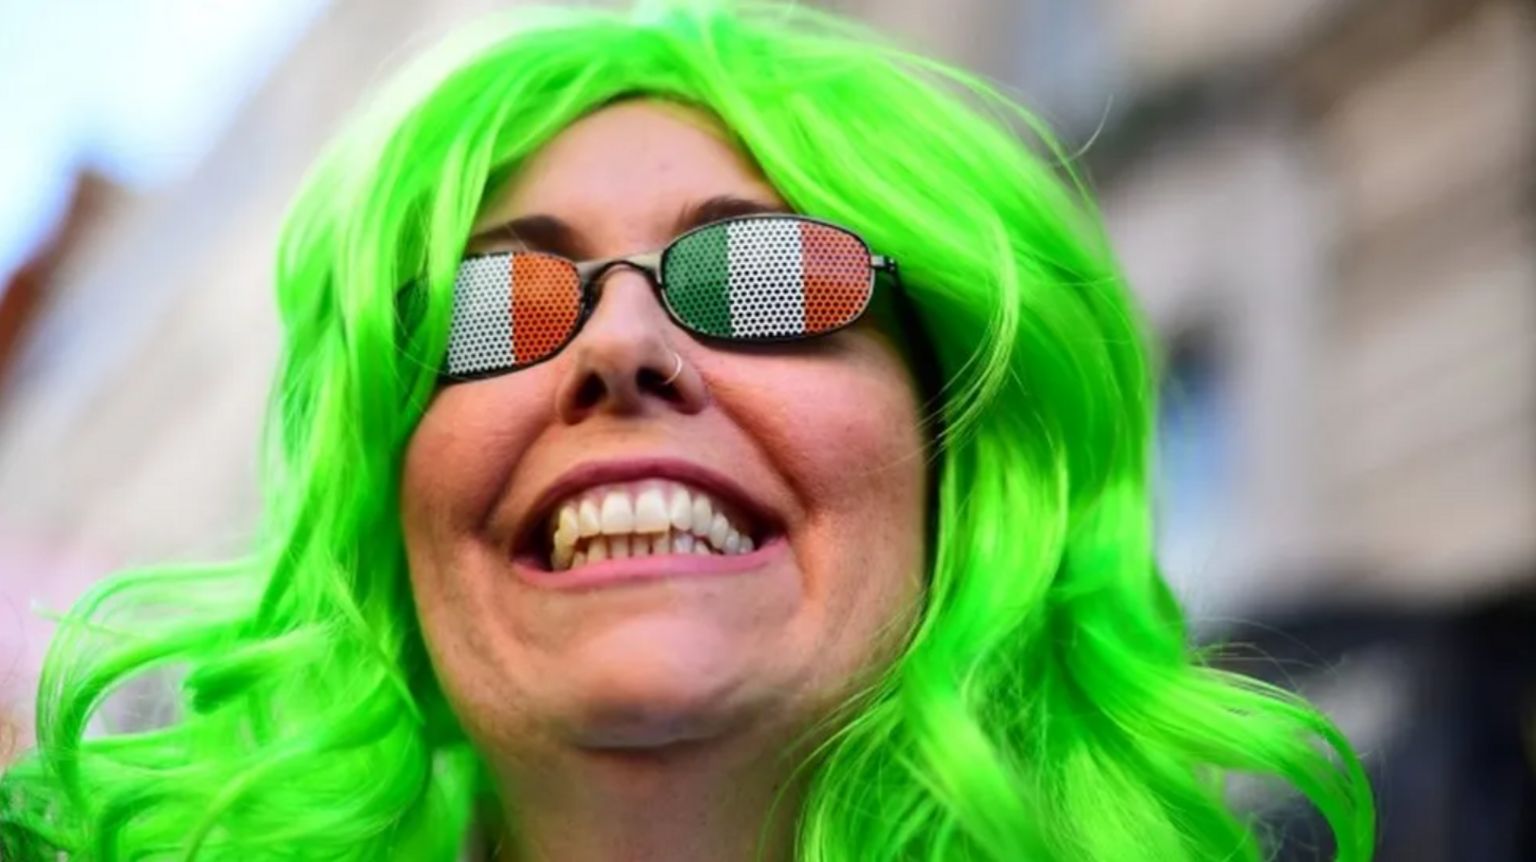 A man with Irish flag glasses and green hair